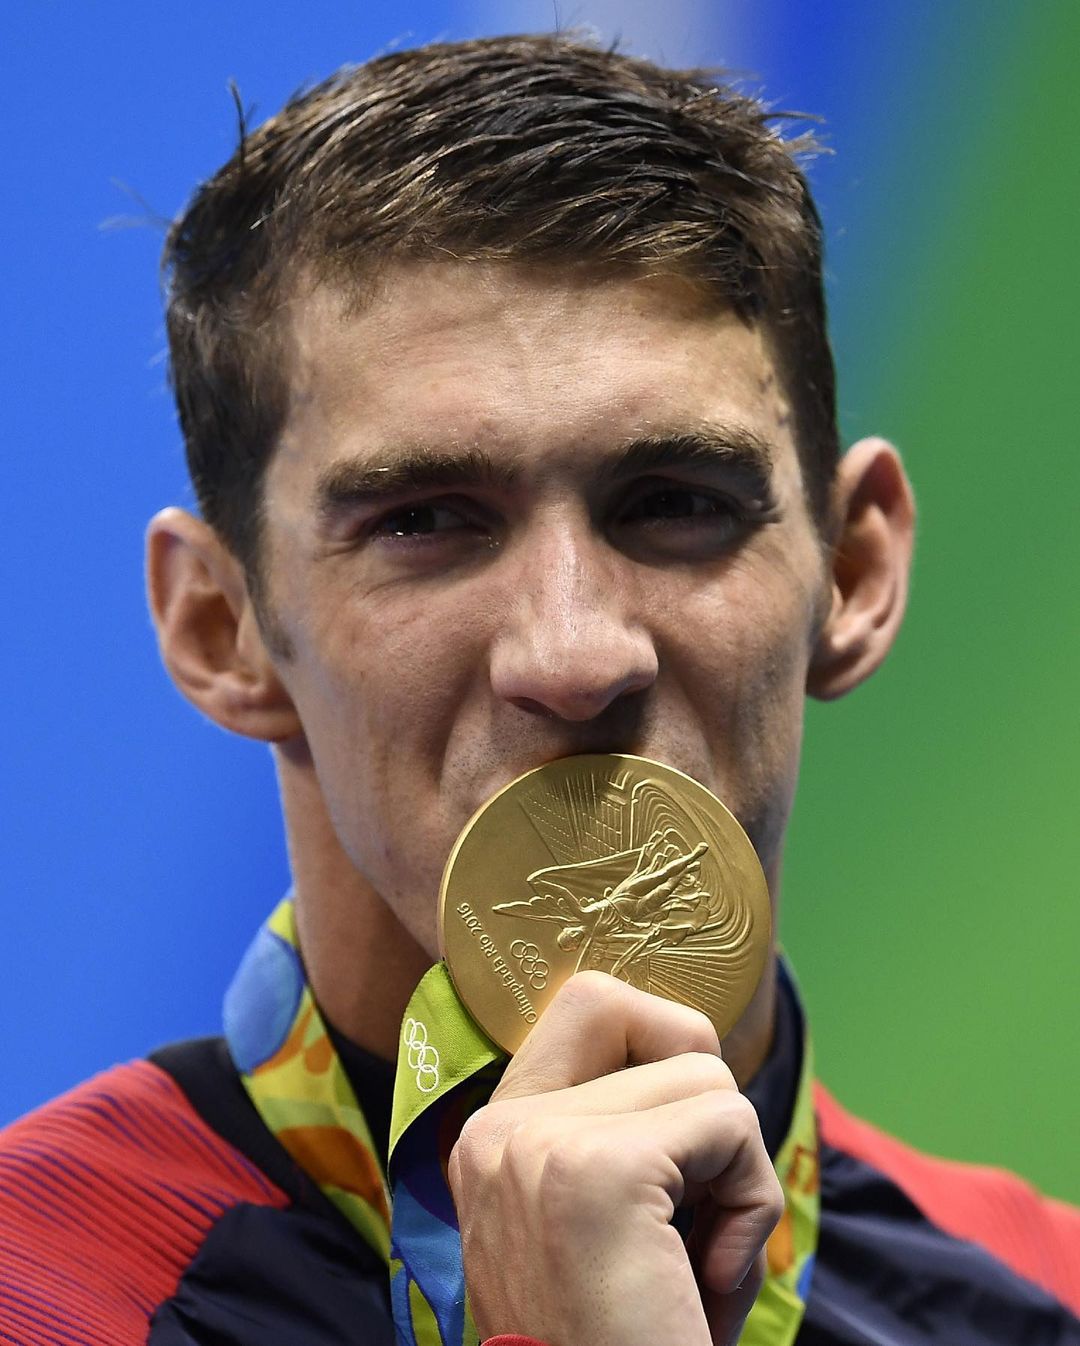 Happy Birthday to 23 time Olympic Gold medalist, Michael Phelps! 